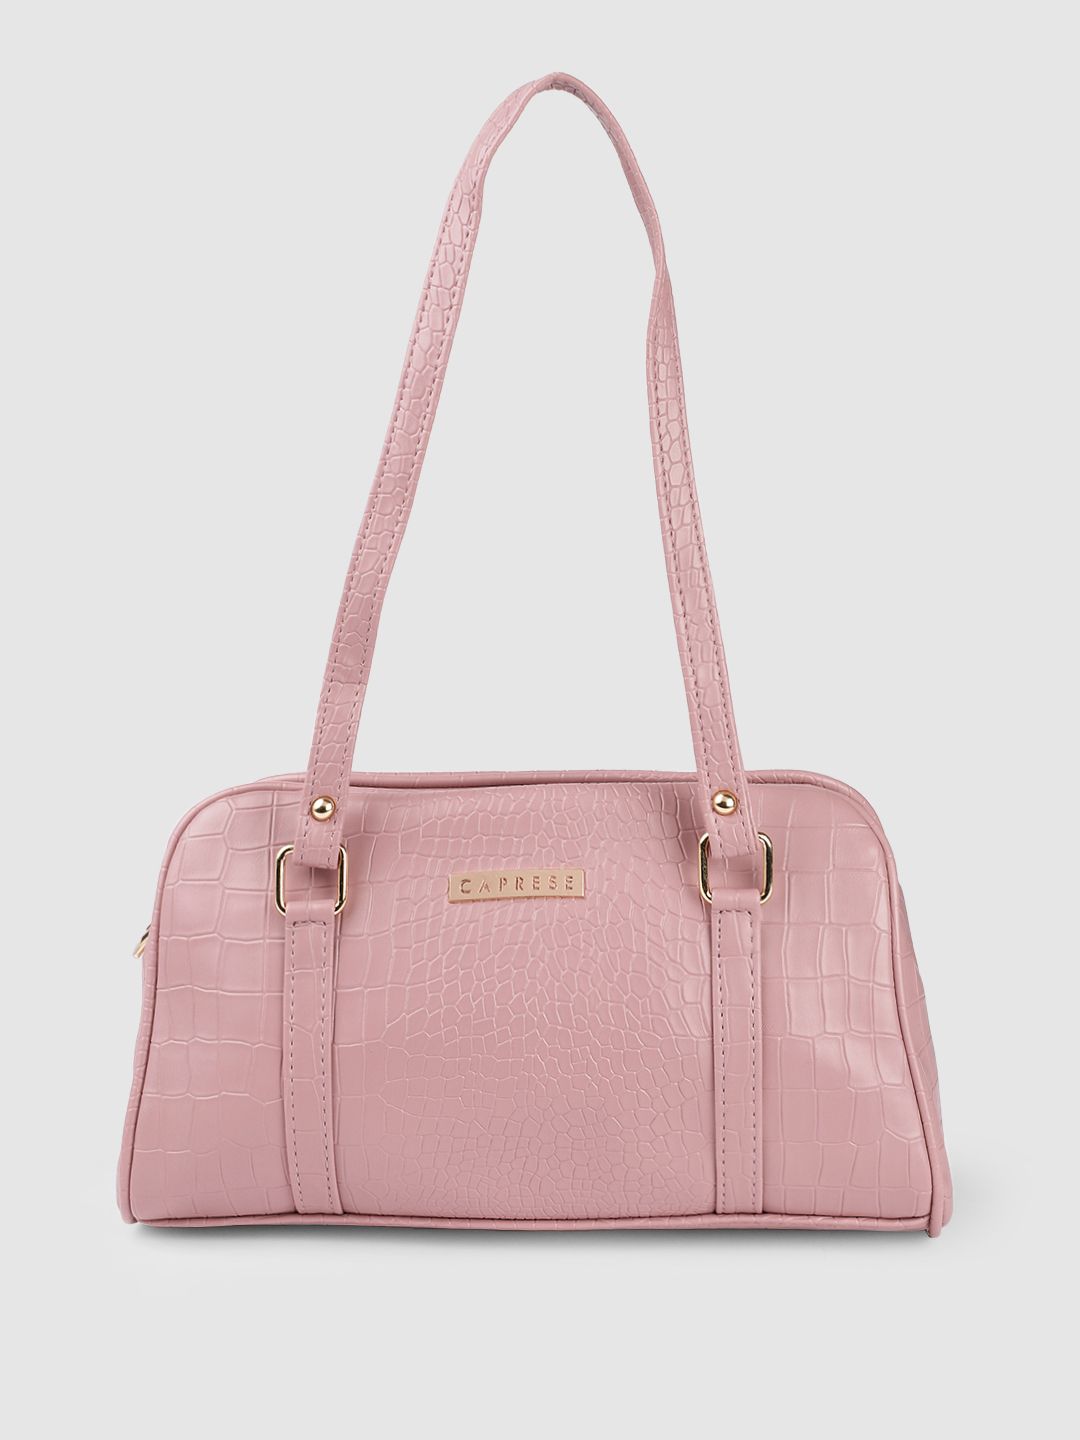 Caprese Nude Pink Animal Textured Leather Shoulder Bag Price in India